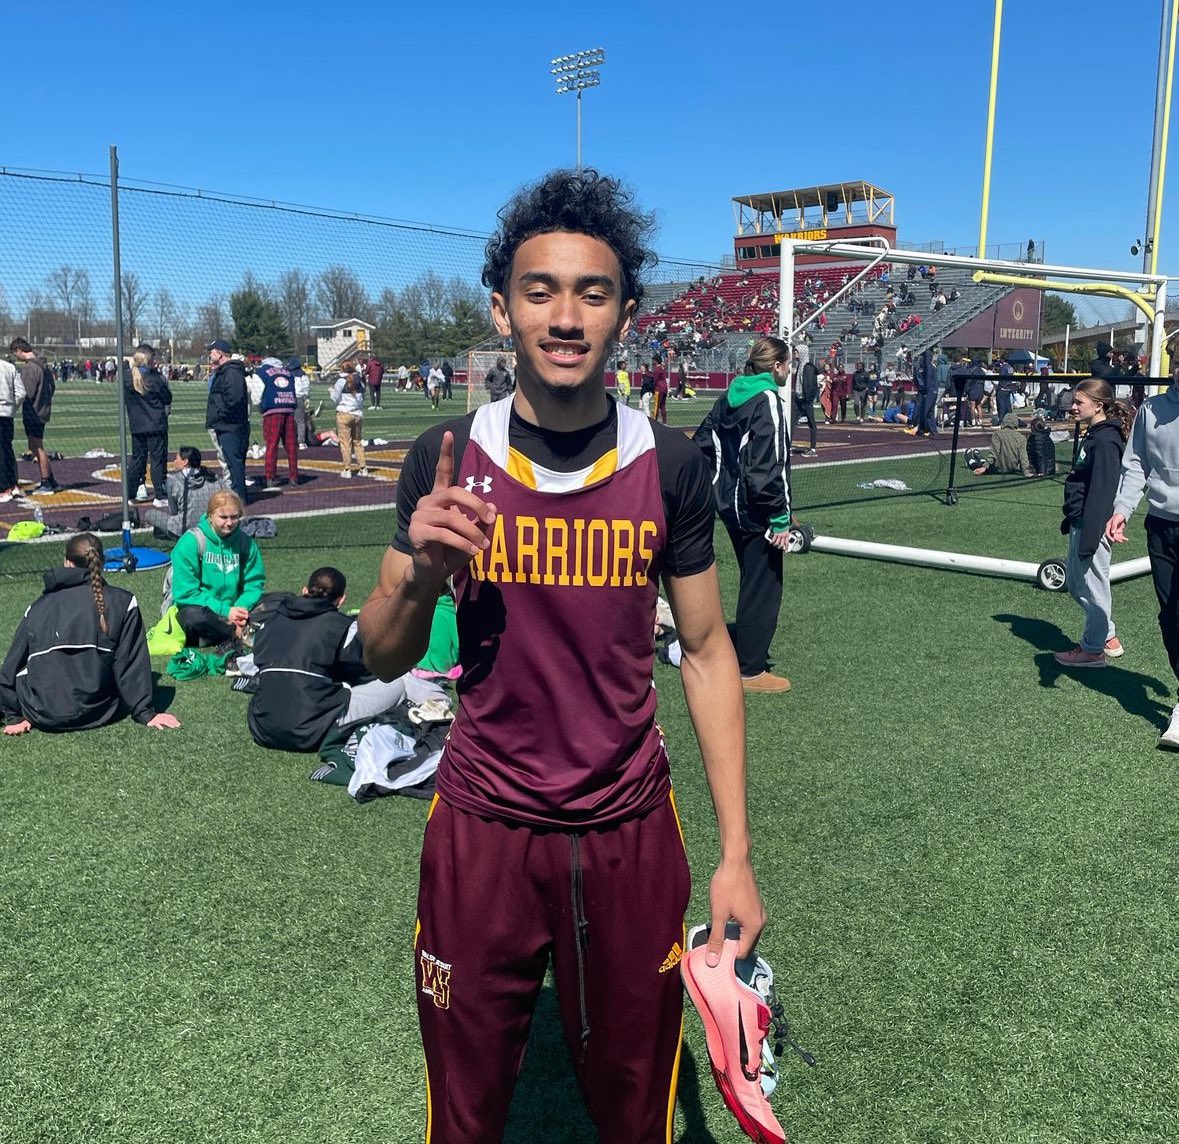 BREAKING NEWS! Senior Drew Fouche with a new Walsh Jesuit 400m School Record at today's Hasenstab Warrior Relays! Drew sprinted a 48.97 to best Steve Fitzhugh’s ‘81 49.00 that has stood for 43 years! Congratulations Drew! @WJ_Track_Field